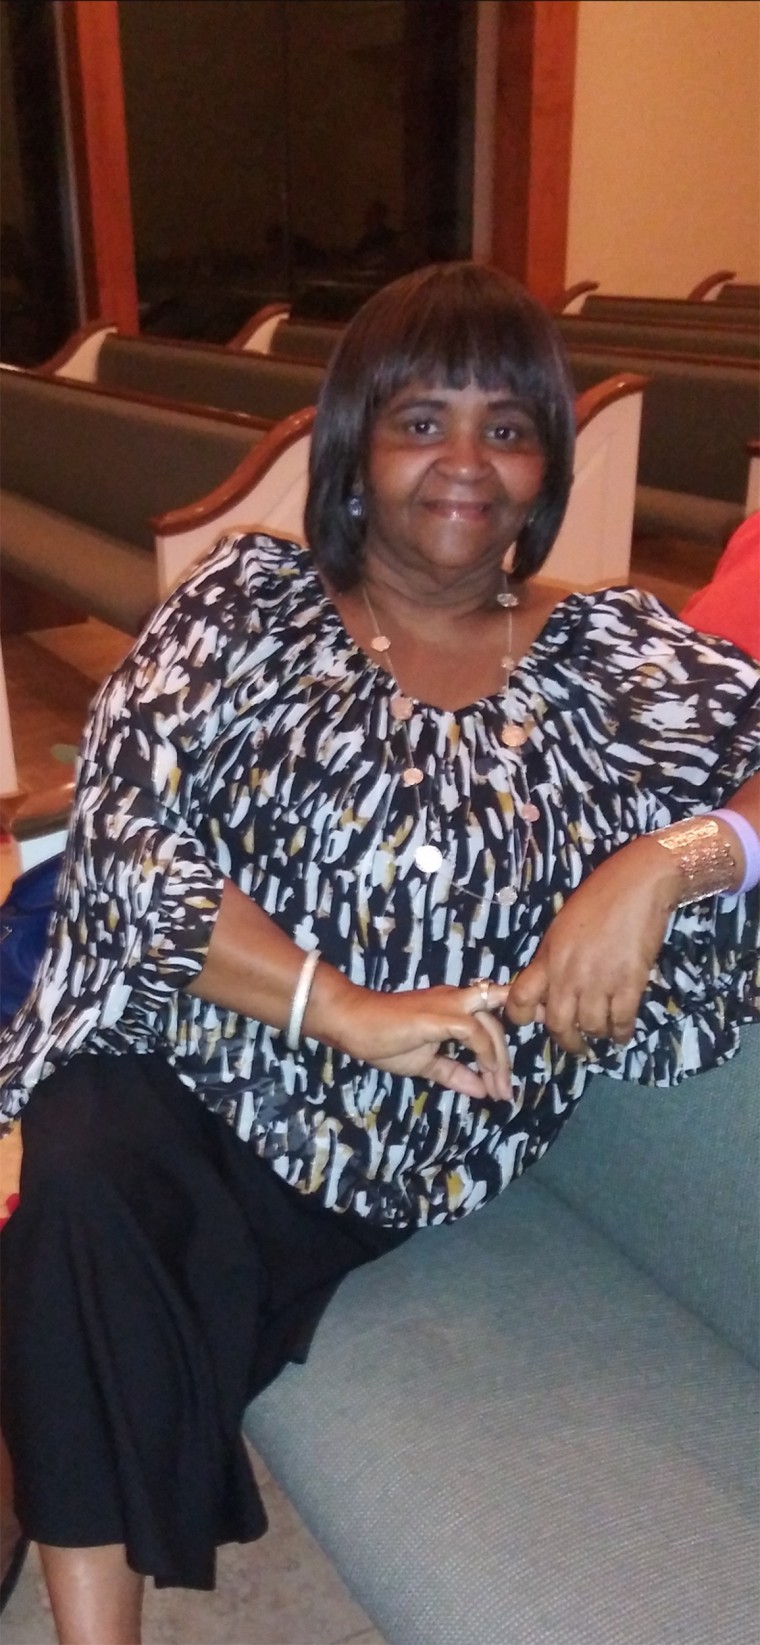 Everyone who met Doris LaVon Sims adored her. Daughter, Sherry Tutt, still grapples with her death because of COVID-19. 